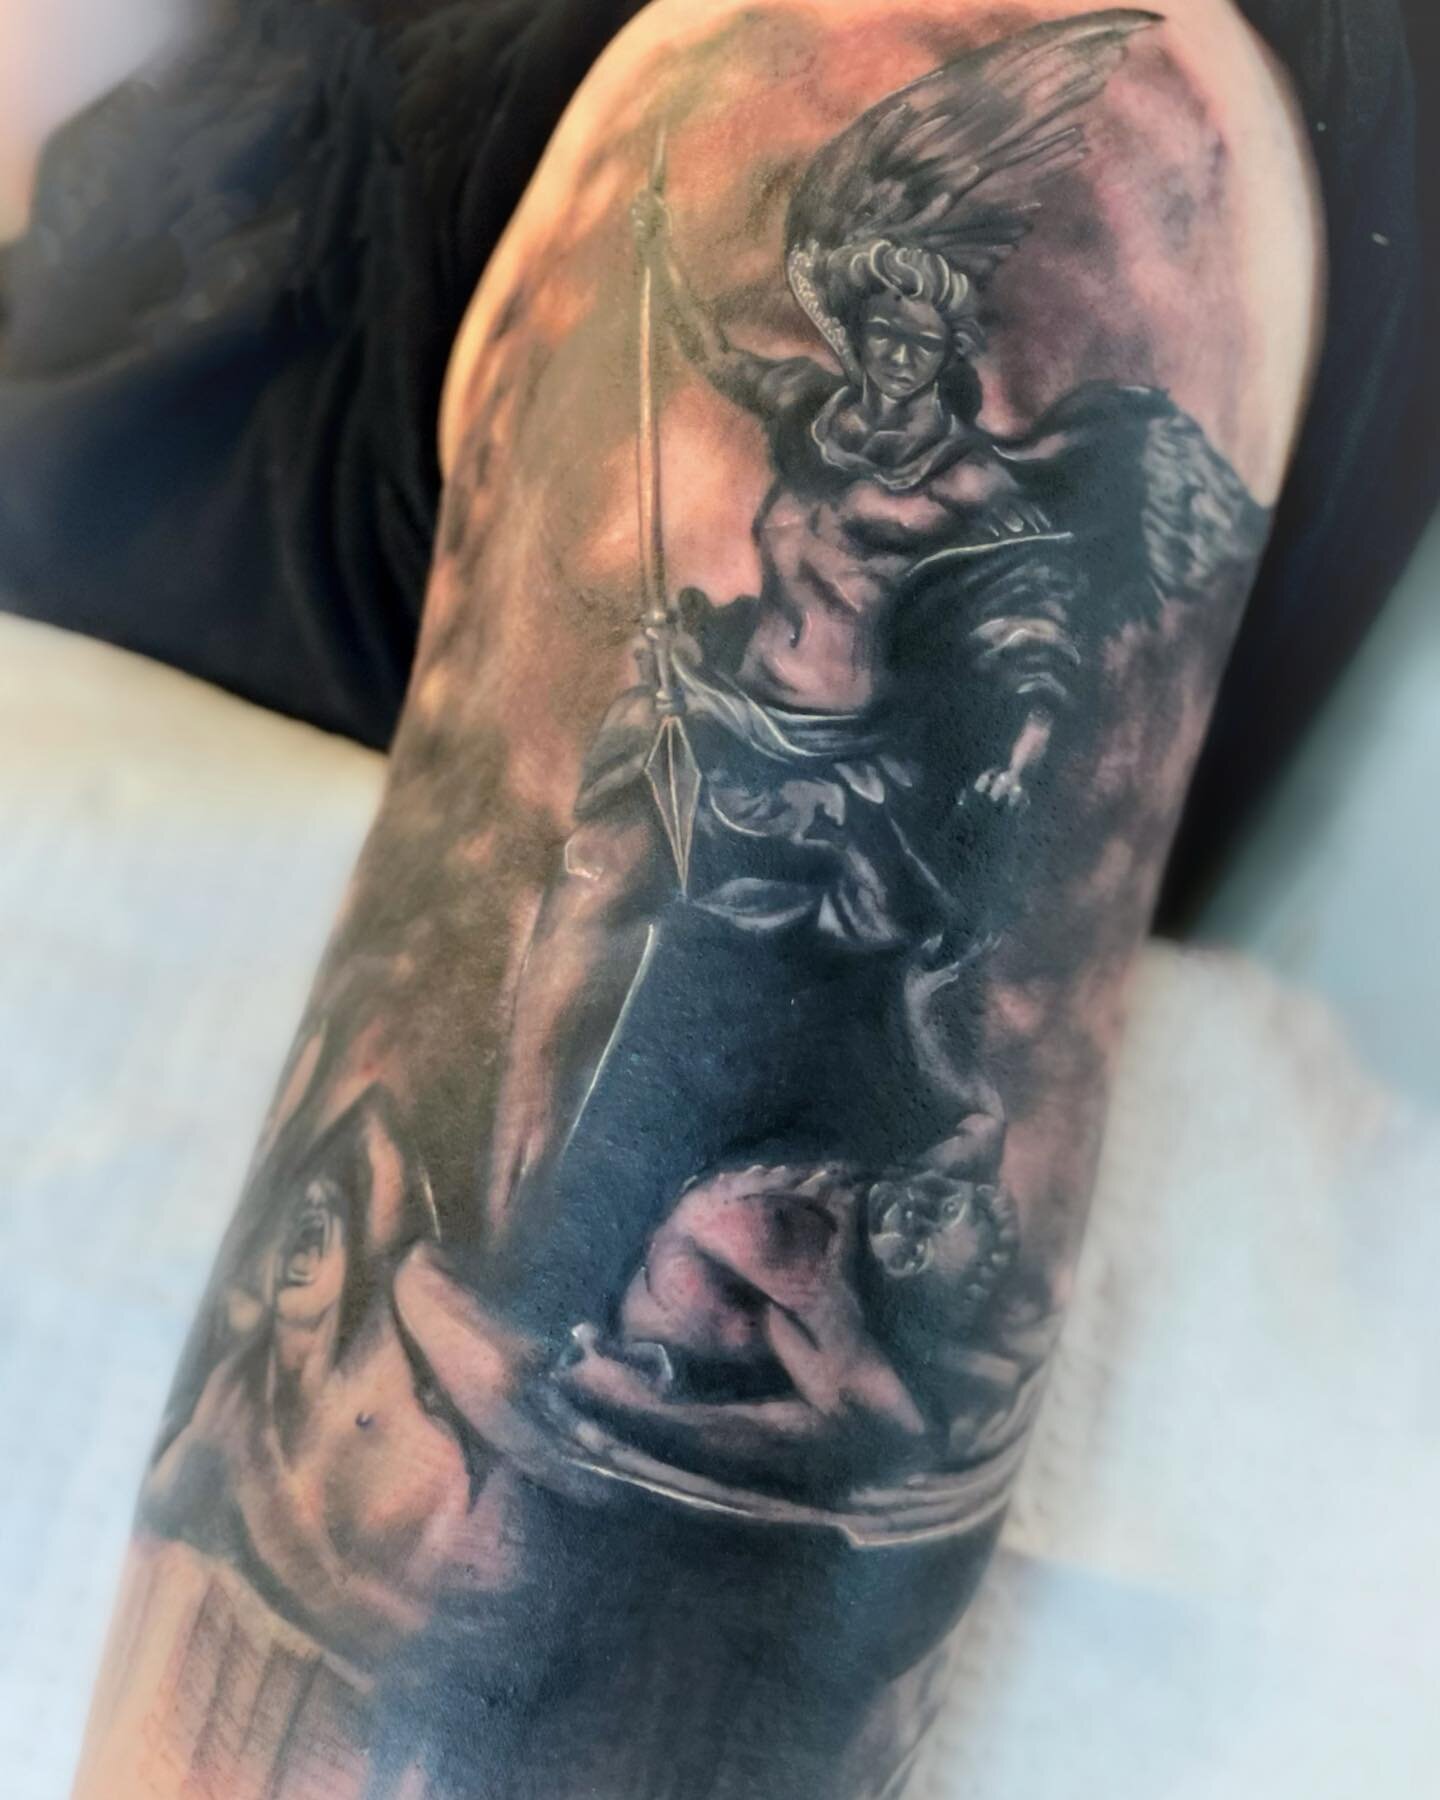 Finished ✔️
I can&rsquo;t wait to keep going on this one!
&bull;
#worldfamousmonkeyhousecustoms #inked #tattoo #tattoos #tattooed #tattoosleeve #tattooart #artist #armtattoo #stowe #stowevermont #vermontlife #vermonting #vermont #gostowe #blackandgre